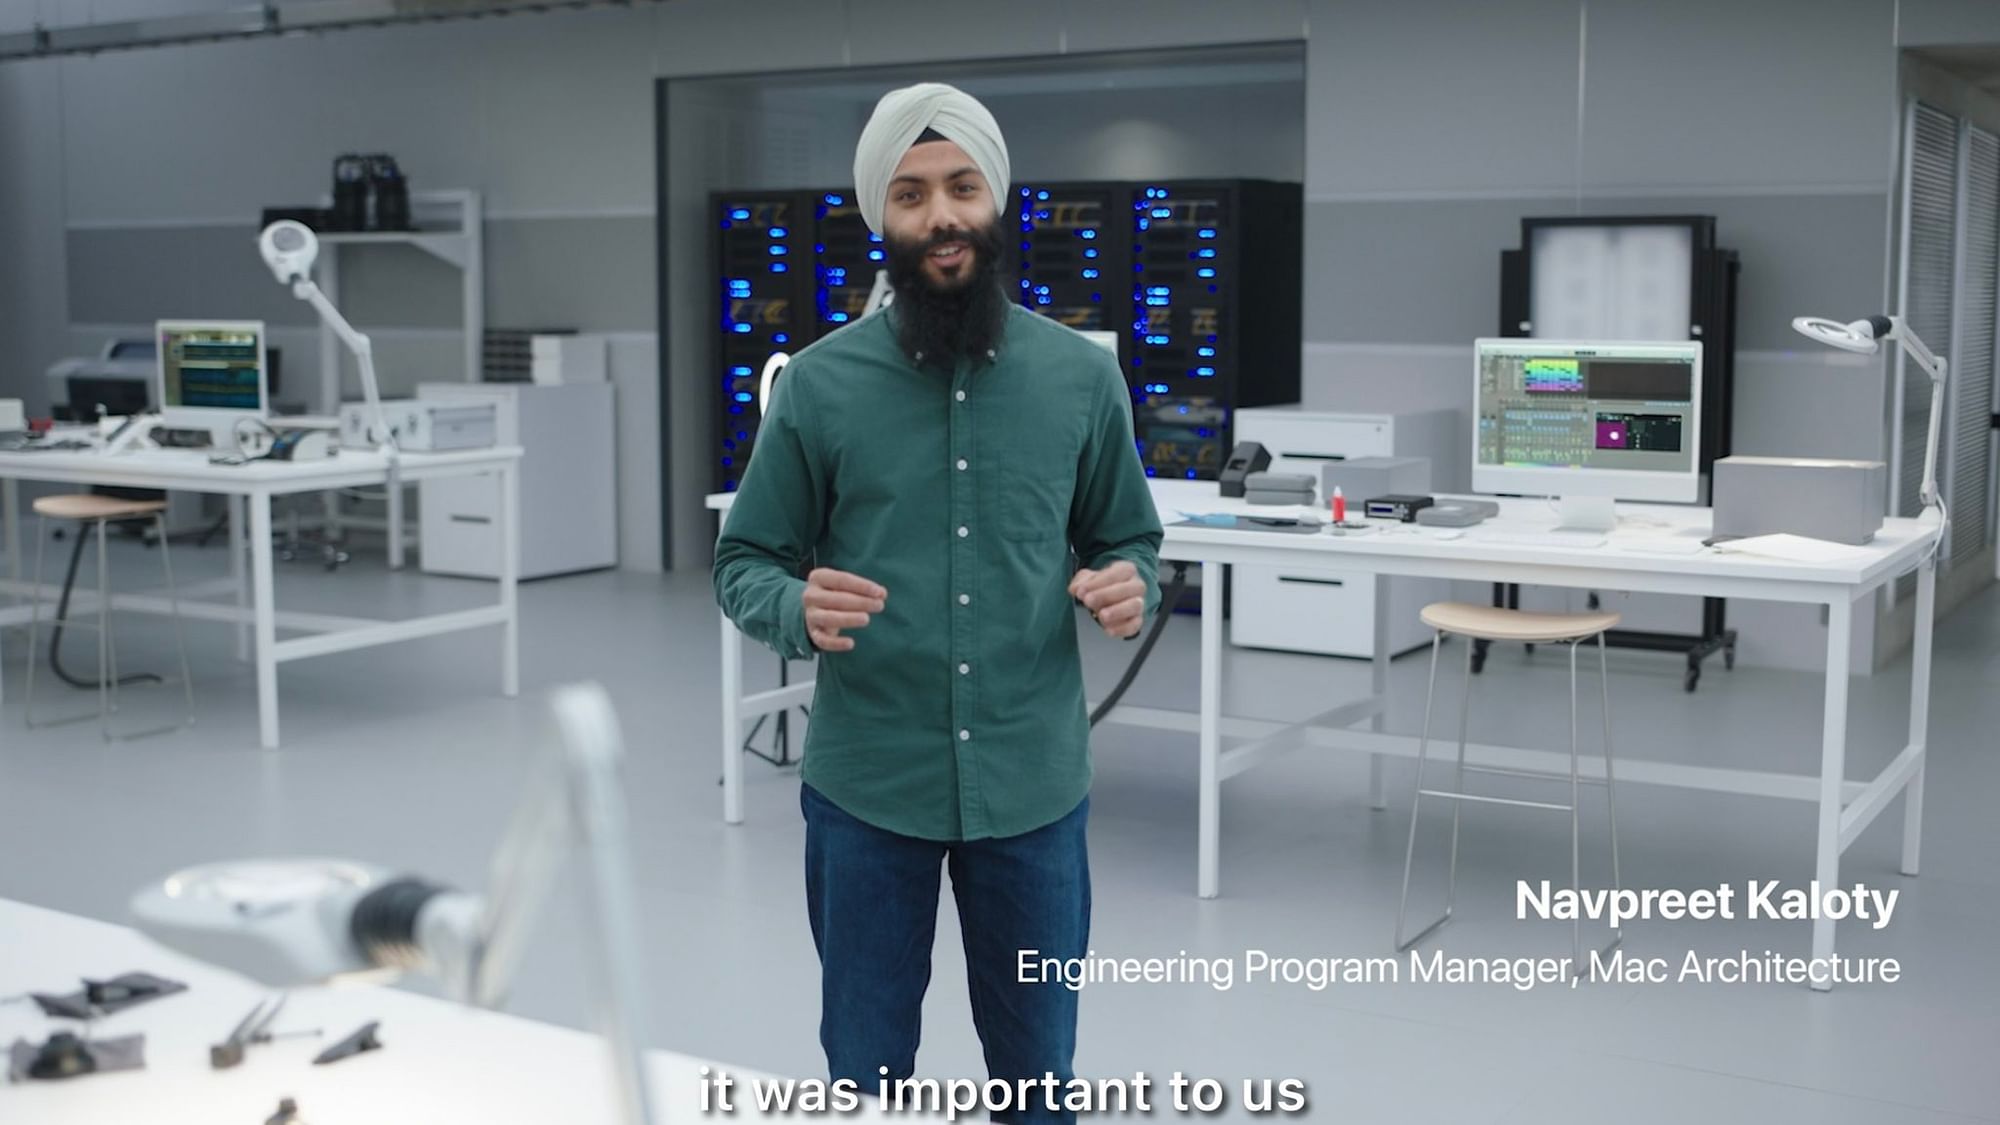 Navpreet Kaloty is an Engineering Program Manager at Apple.